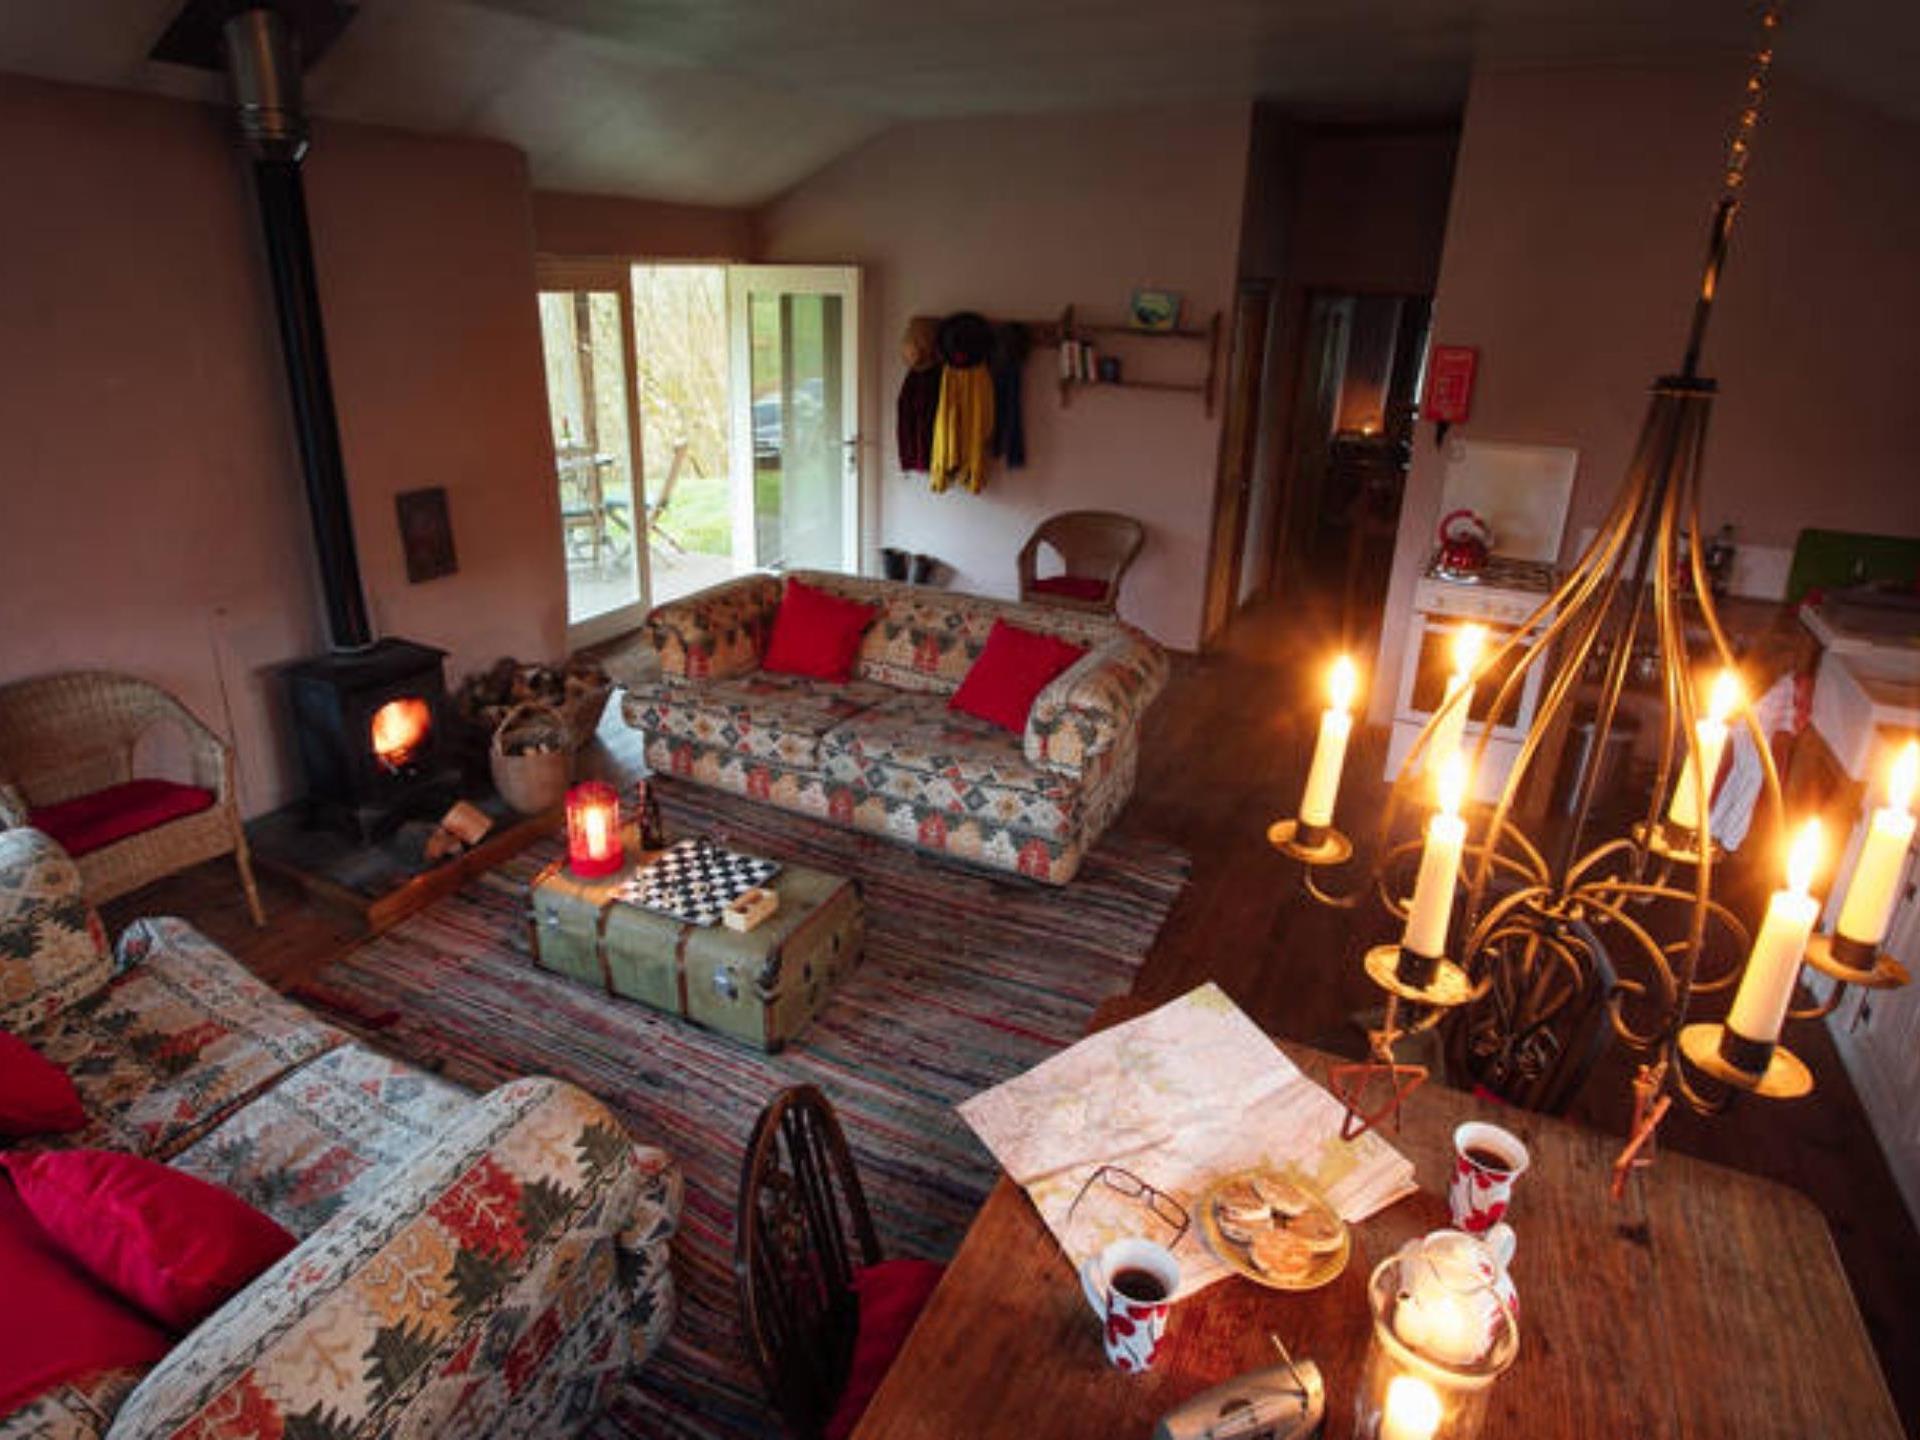 The main room at Straw cottage